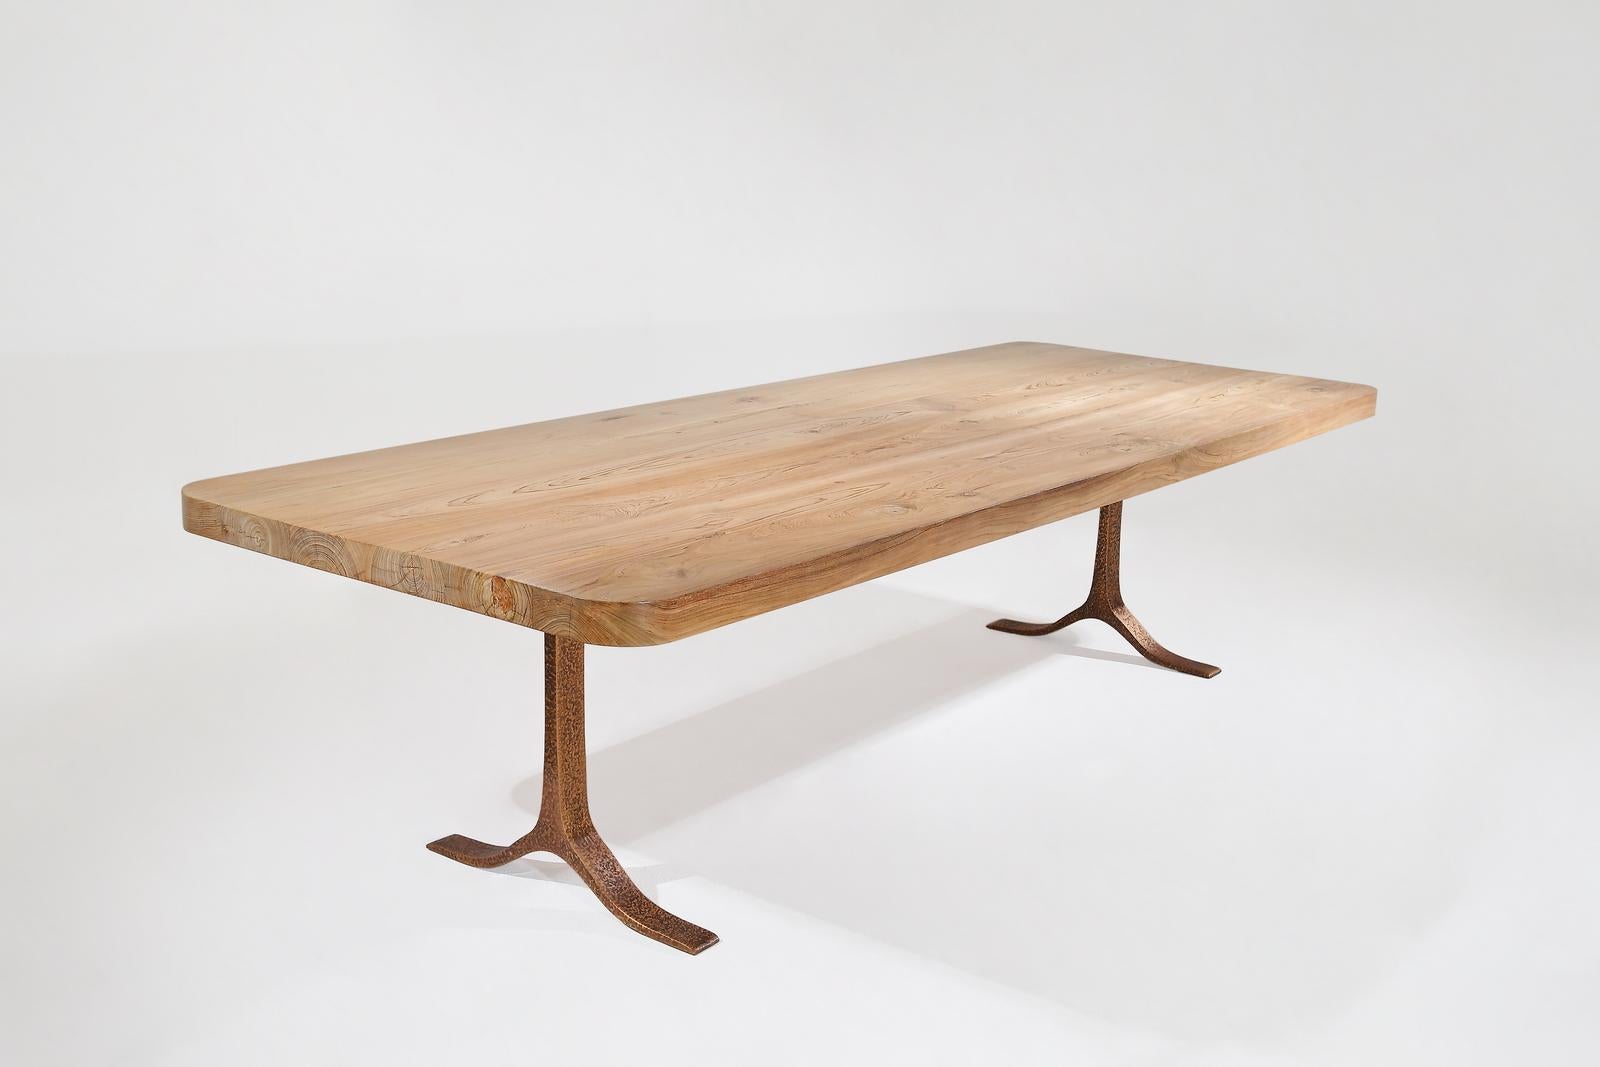 Minimalist Bespoke Dining Table, Reclaimed Wood, Sand Cast Bronze Base, by P. Tendercool For Sale